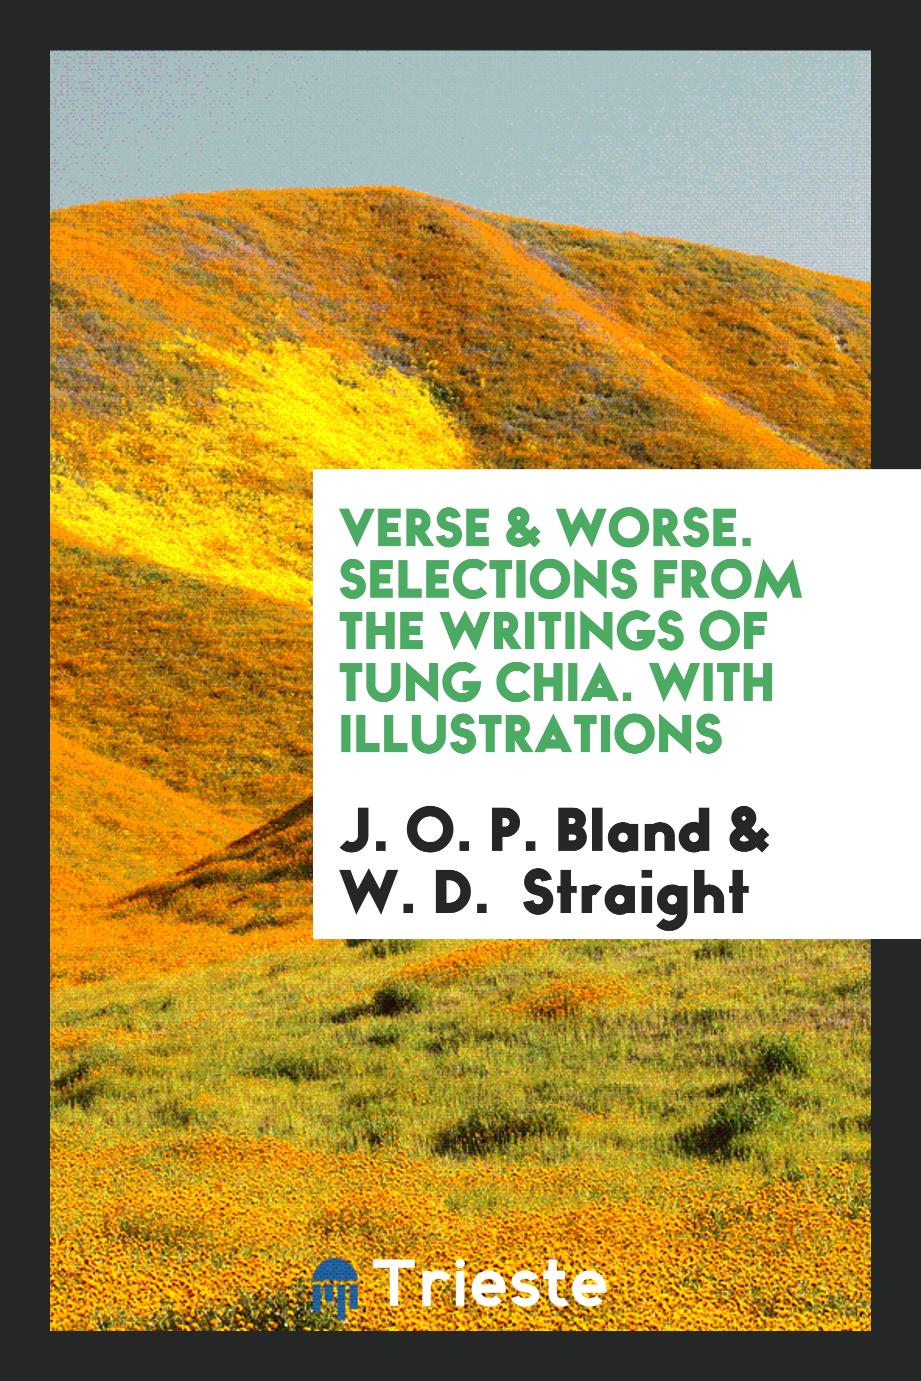 Verse & Worse. Selections from the Writings of Tung Chia. With Illustrations